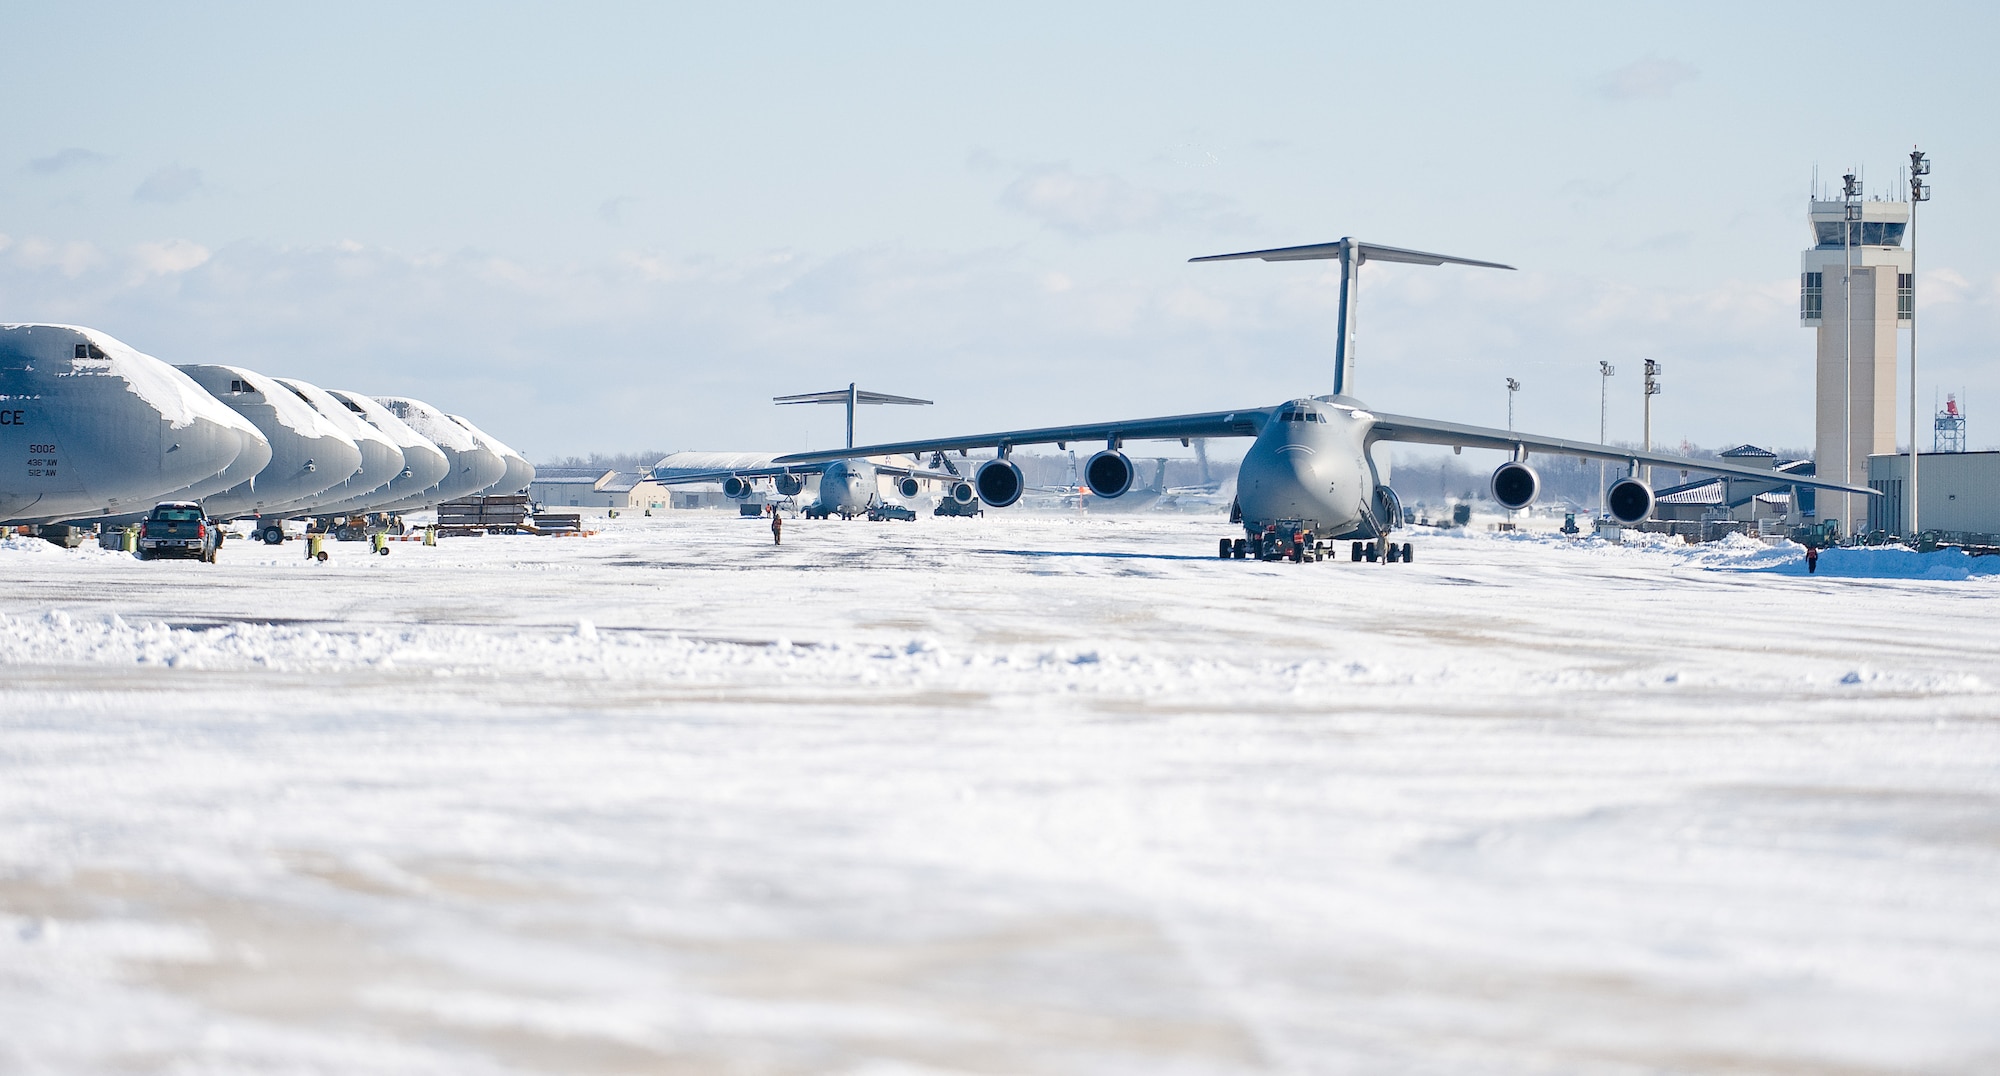 U.S. Airmen tow a C-5M Super Galaxy aircraft at Dover Air Force Base, Del., Jan. 3, 2014. Airmen with the 436th Civil Engineer Squadron cleared snow from the flight line after a storm. (U.S. Air Force photo by Roland Balik/Released)